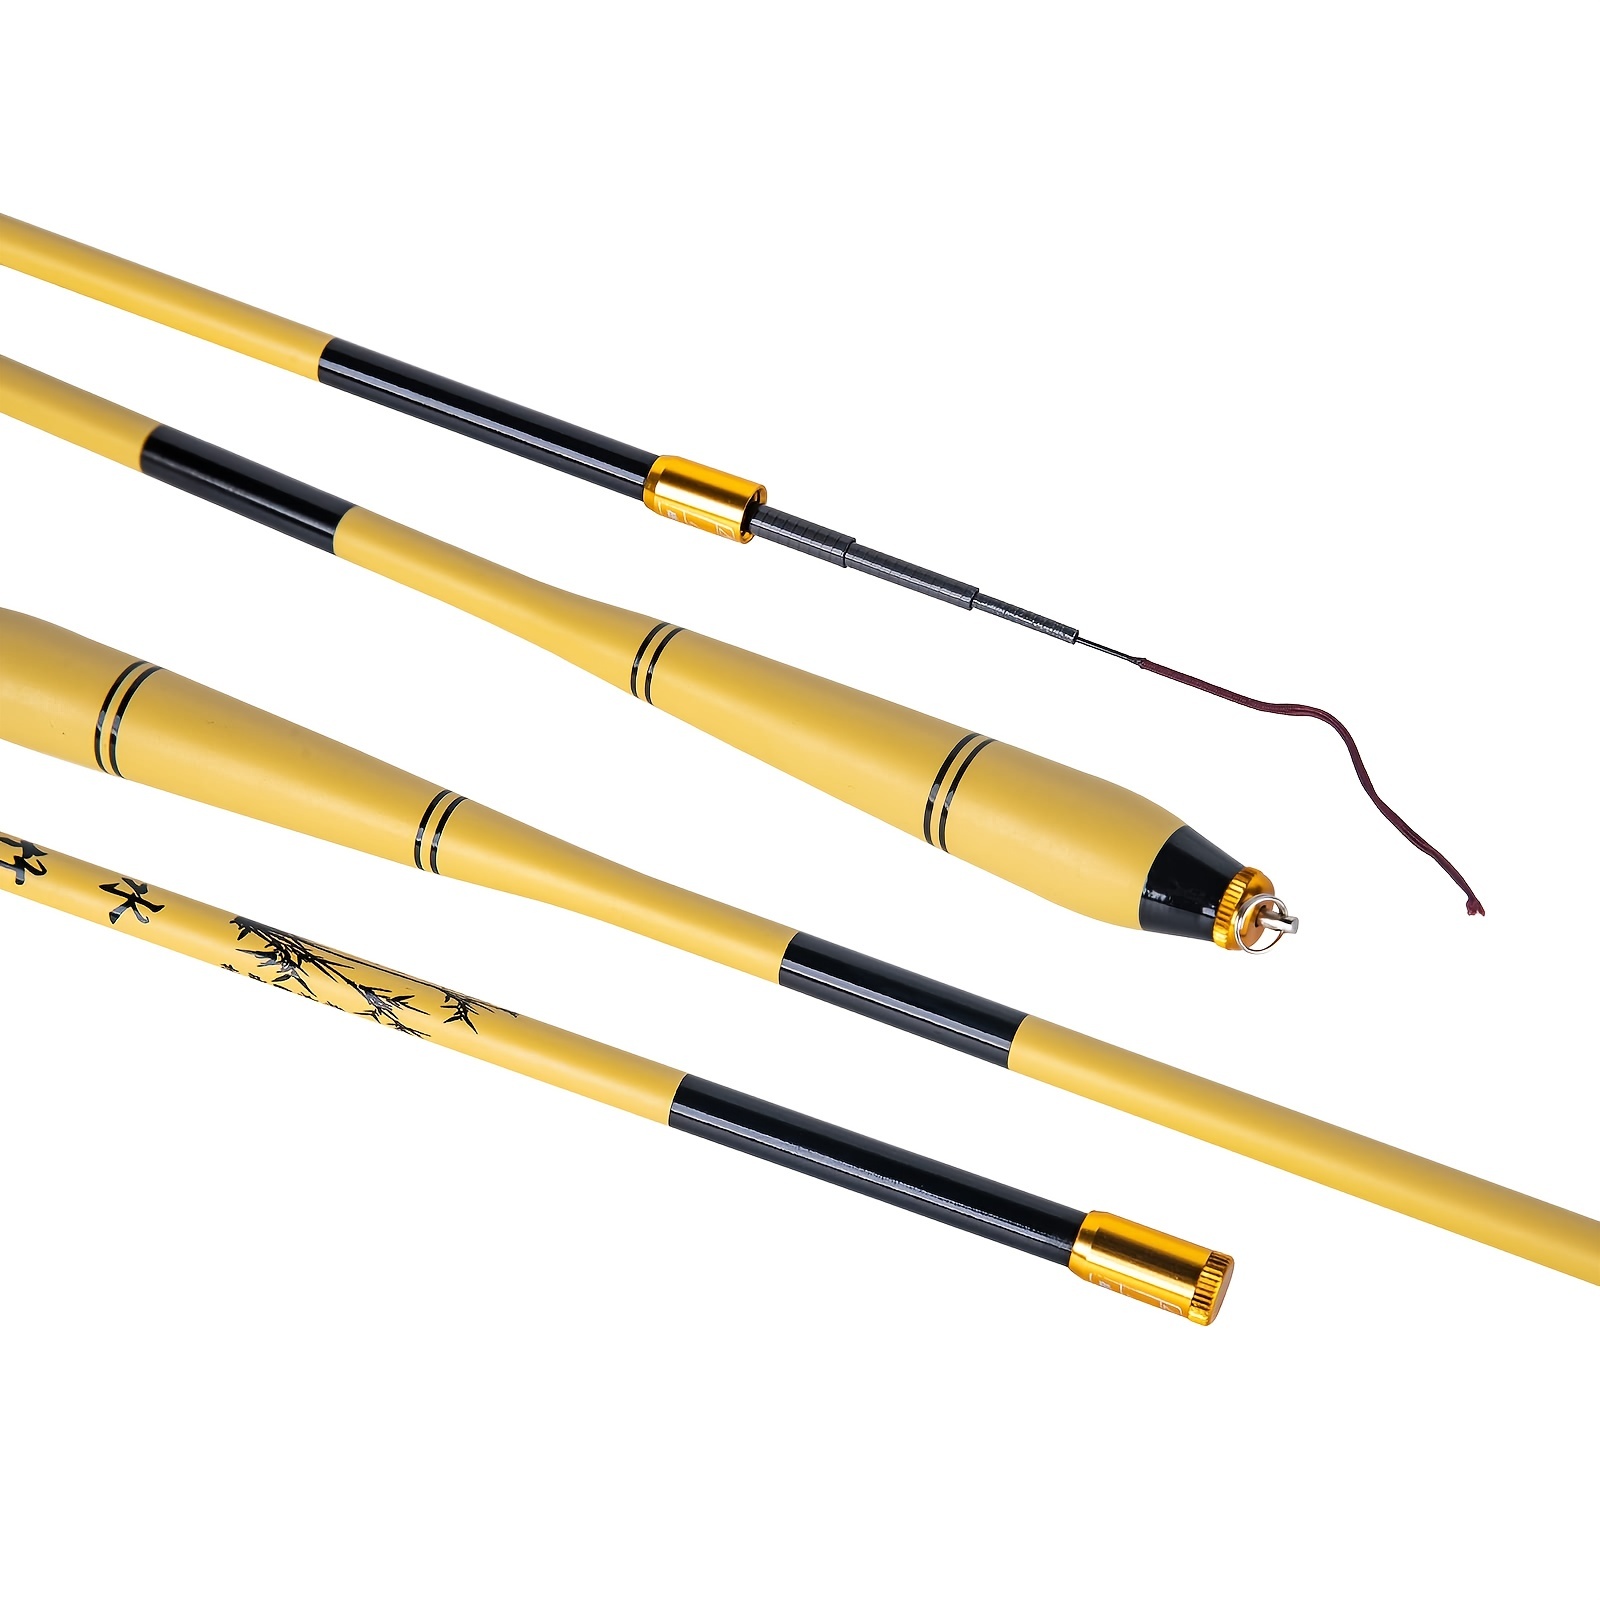 Bamboo Telescopic Fishing Rods & Poles for sale